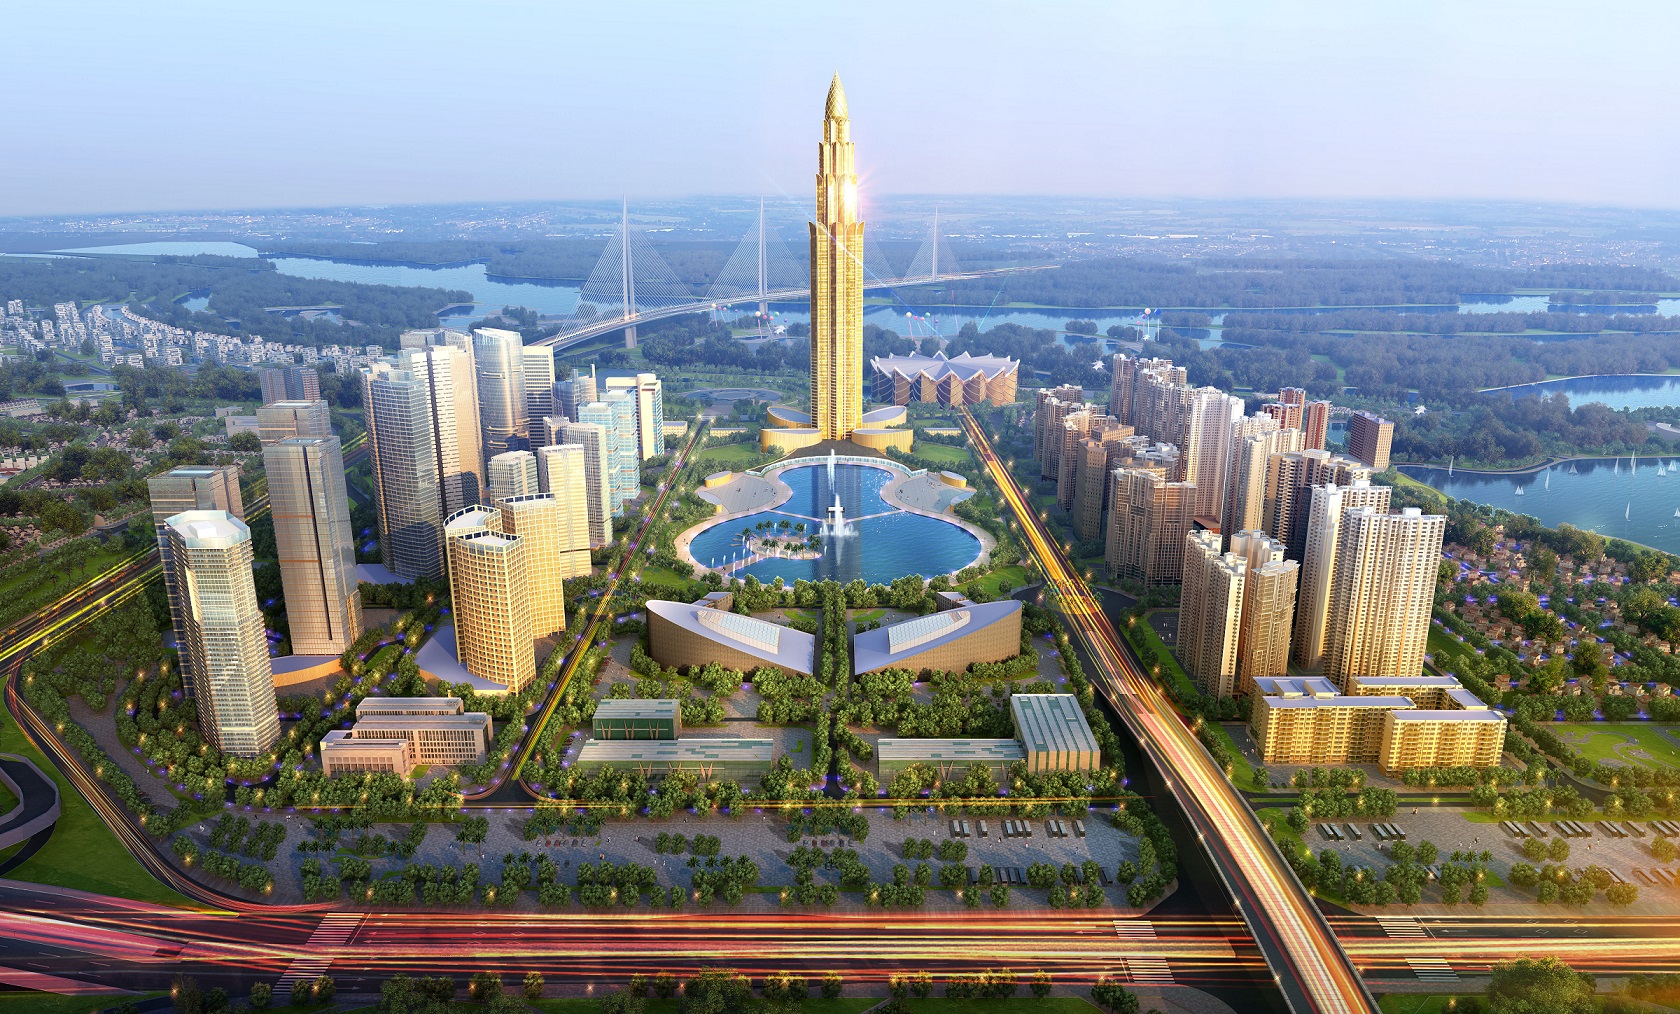 SMART CITY PROJECT ANNOUNCES THE ARCHITECTURAL DESIGN CONTEST FOR 108-STOREY FINANCIAL TOWER